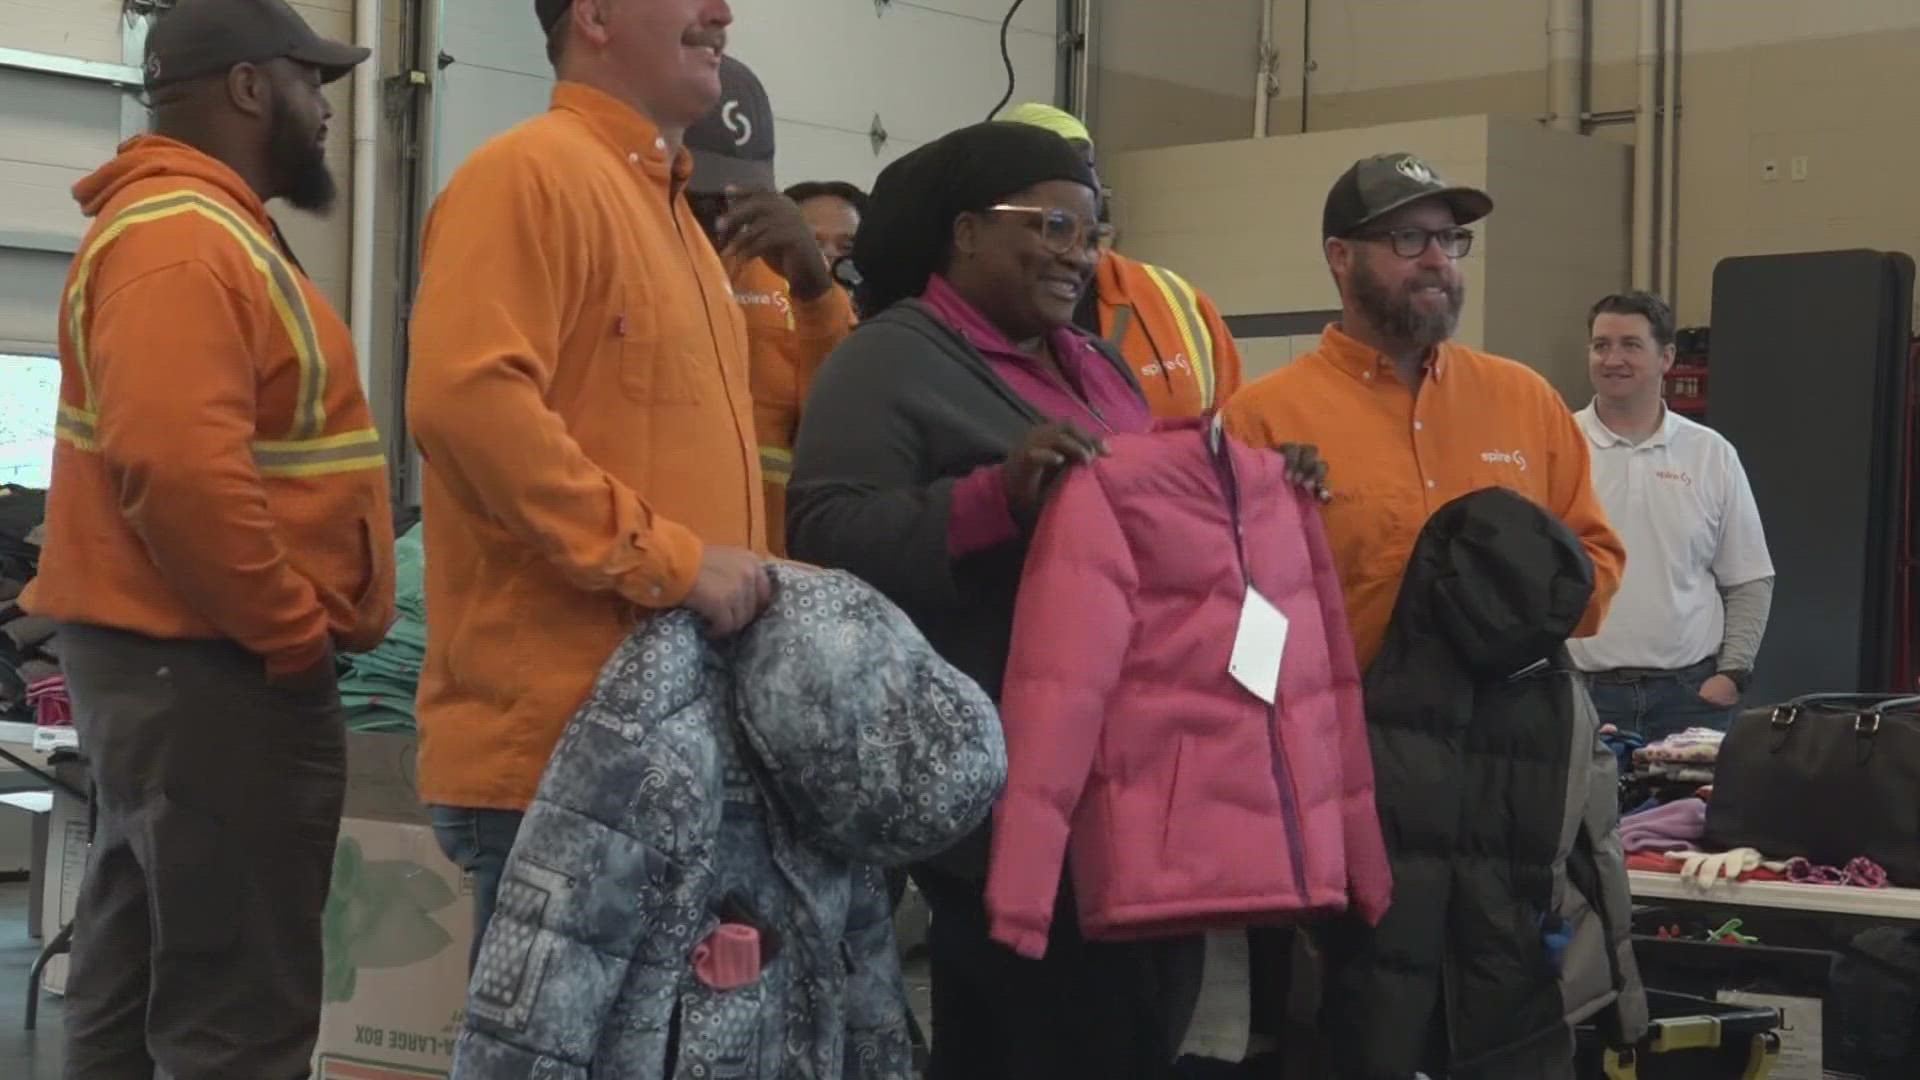 Organizers said more than 1,000 coats were given to families. Spire donated and helped distribute 700 coats.